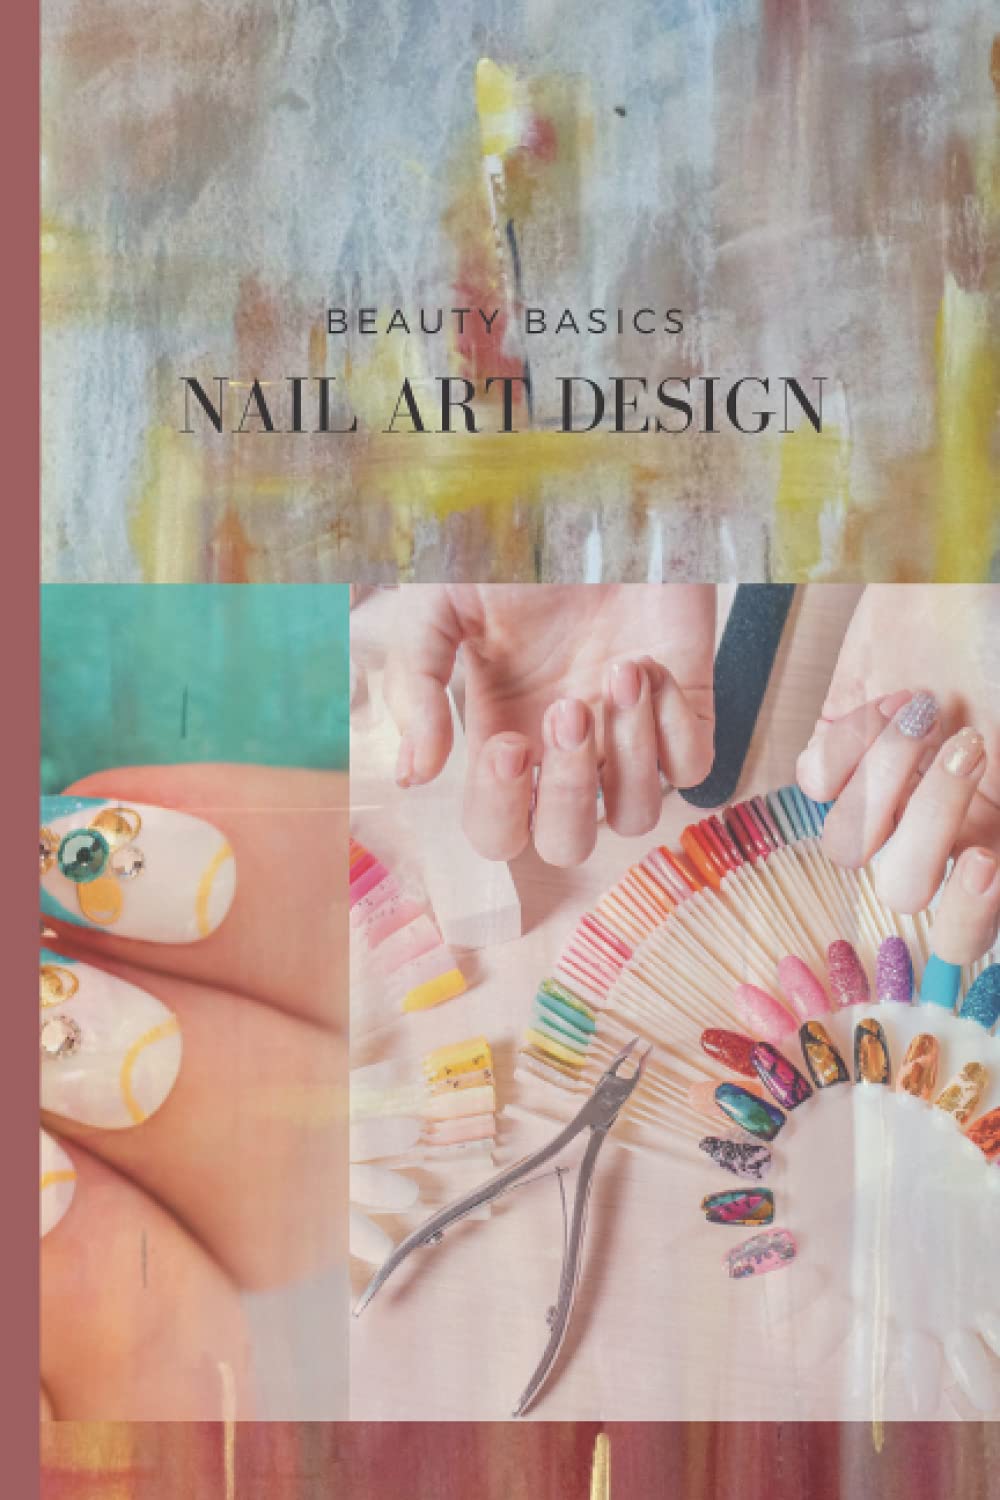 You are currently viewing Nail Art Design: 6×9 120 pages – Beauty Basics, Create Designs, Write Descriptions, Set Color Palette, Draw Patterns, Track Used Brands, Be Creative